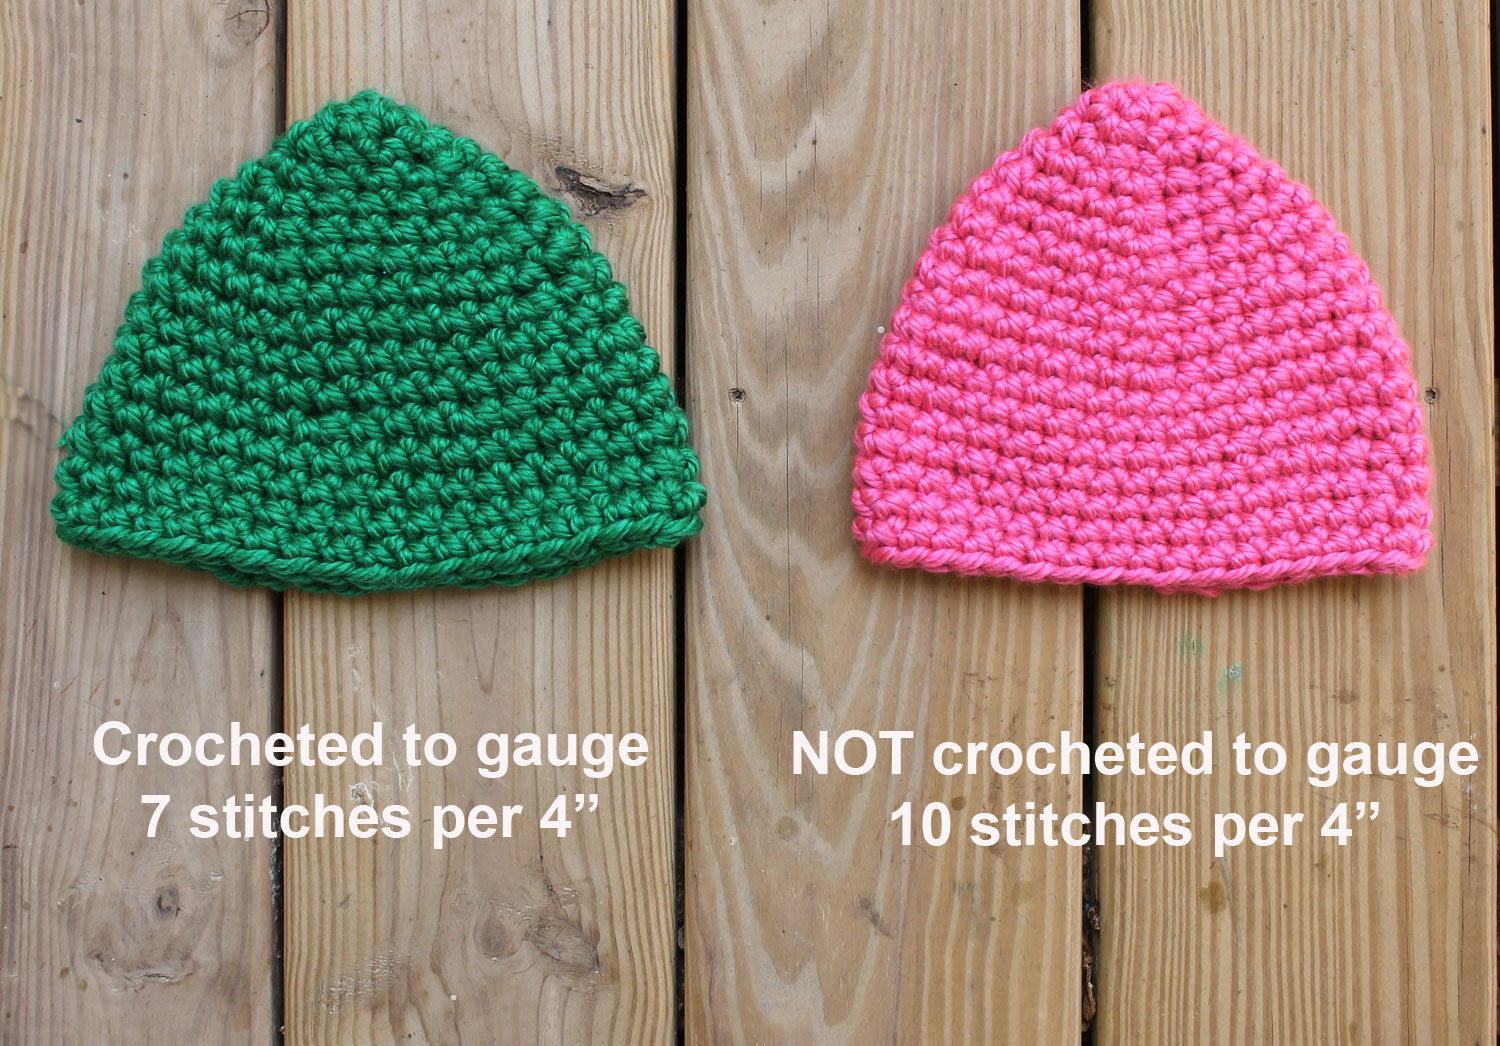 Crochet Gauge 101: Why Gauge Matters and How to Match It